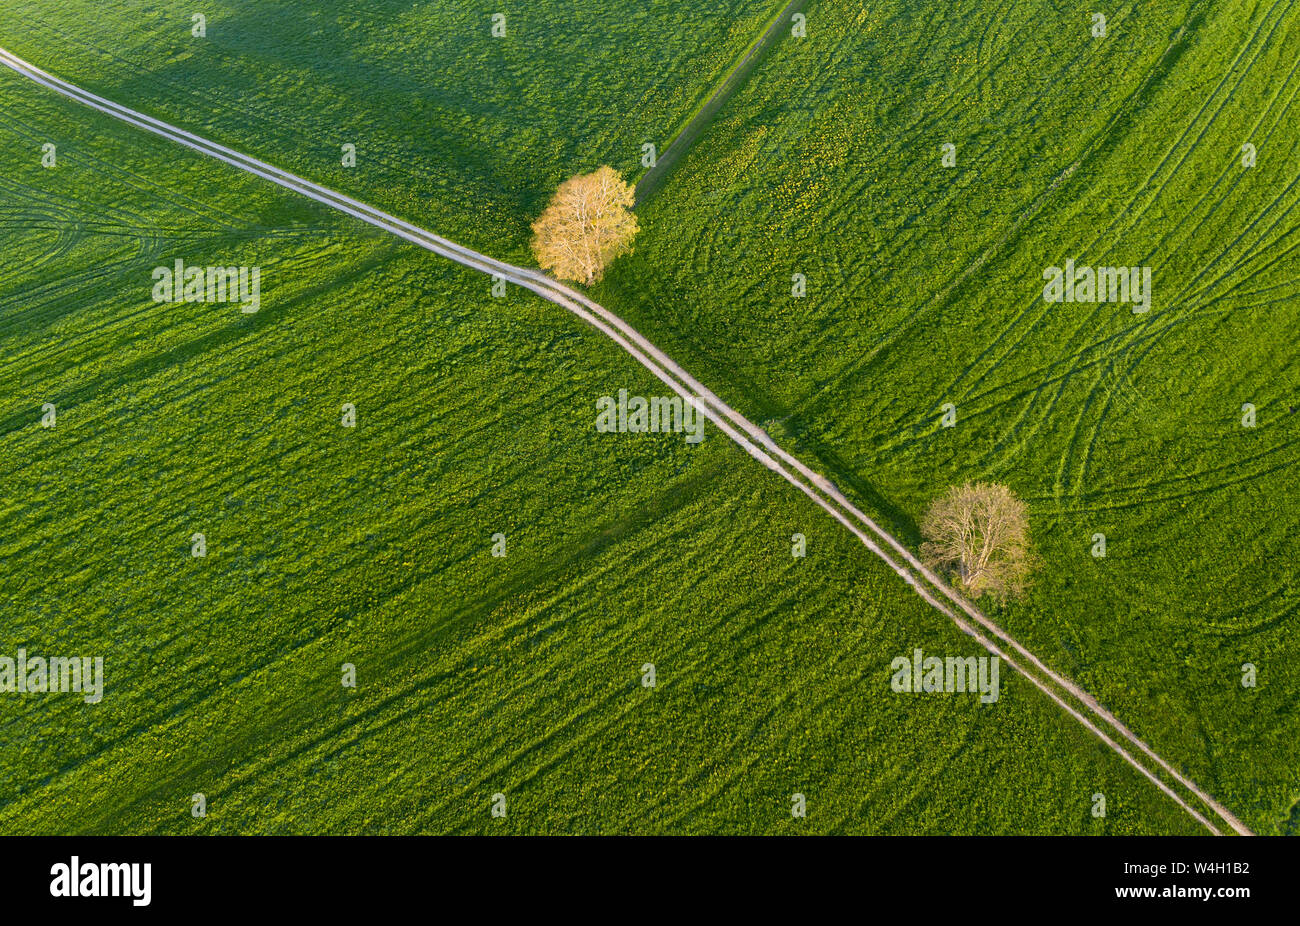 Aerial view over meadow with dirt track and trees, Holzhausen, Bavaria, Germany Stock Photo